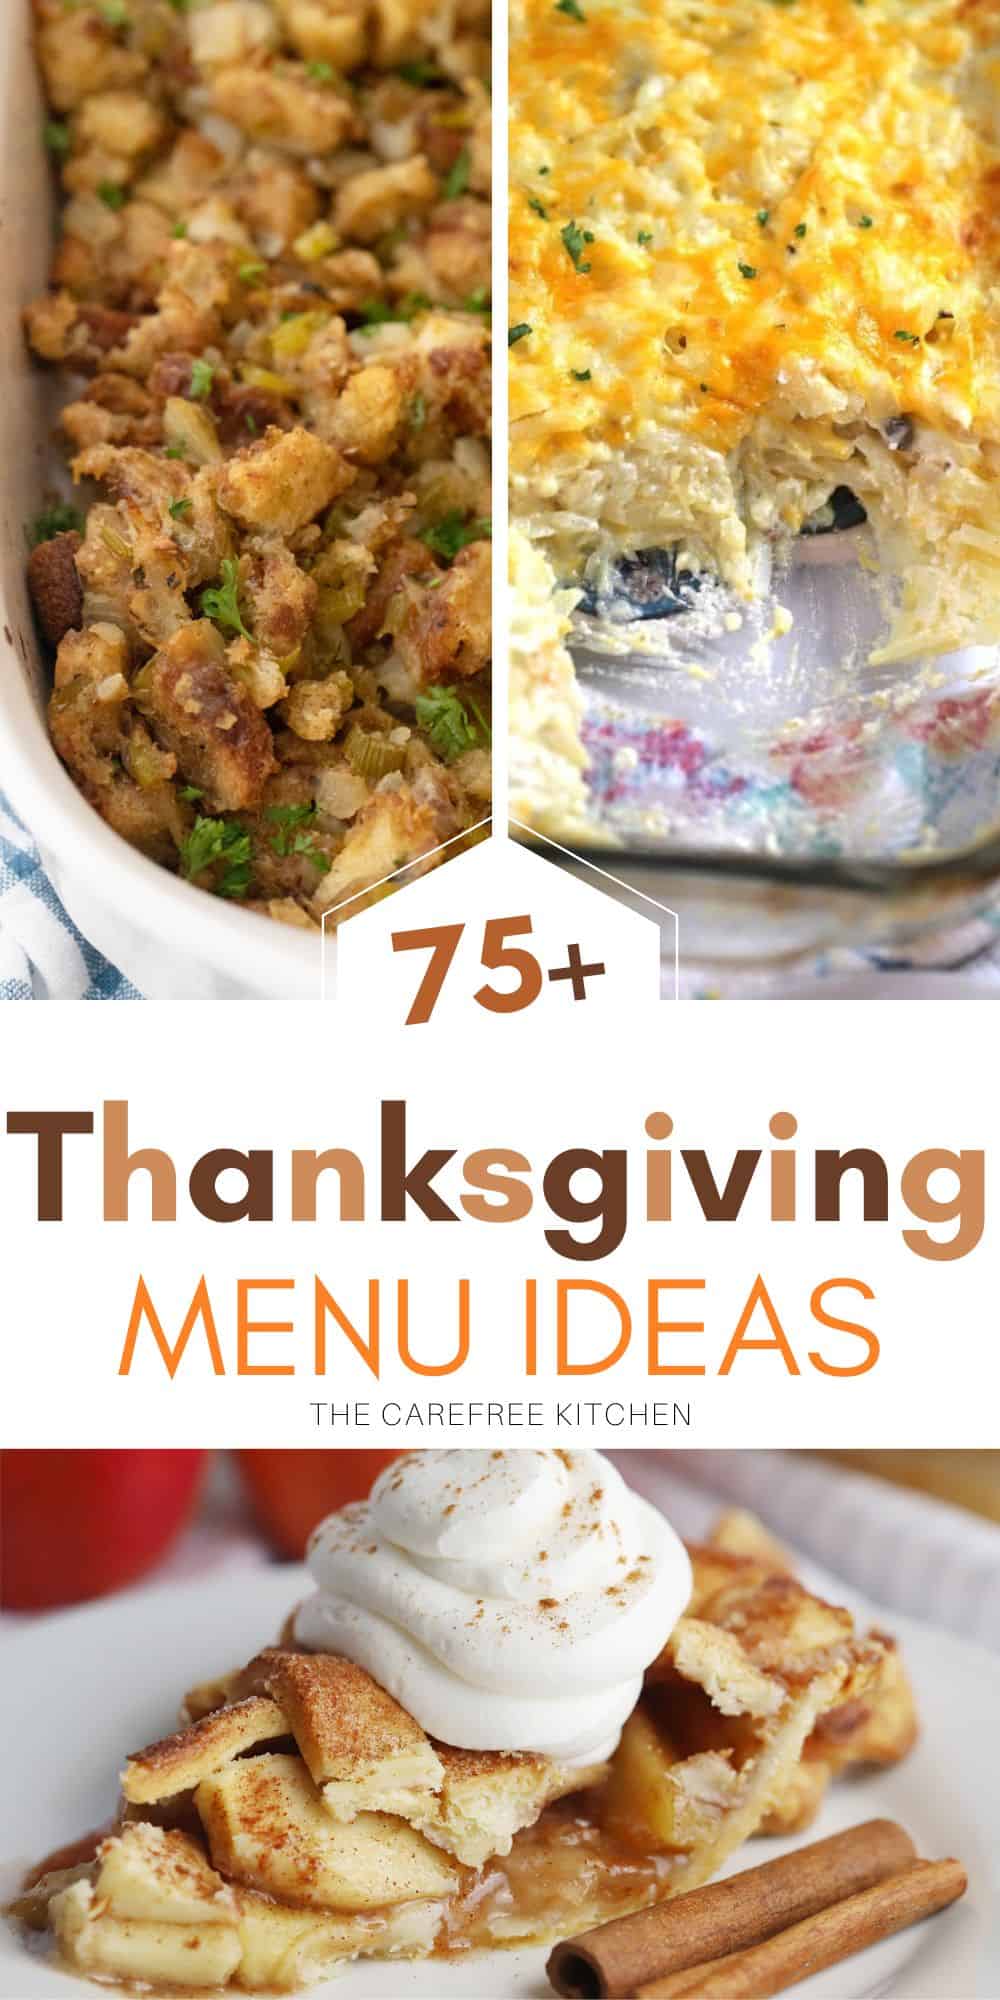 Best Thanksgiving Recipes - The Carefree Kitchen